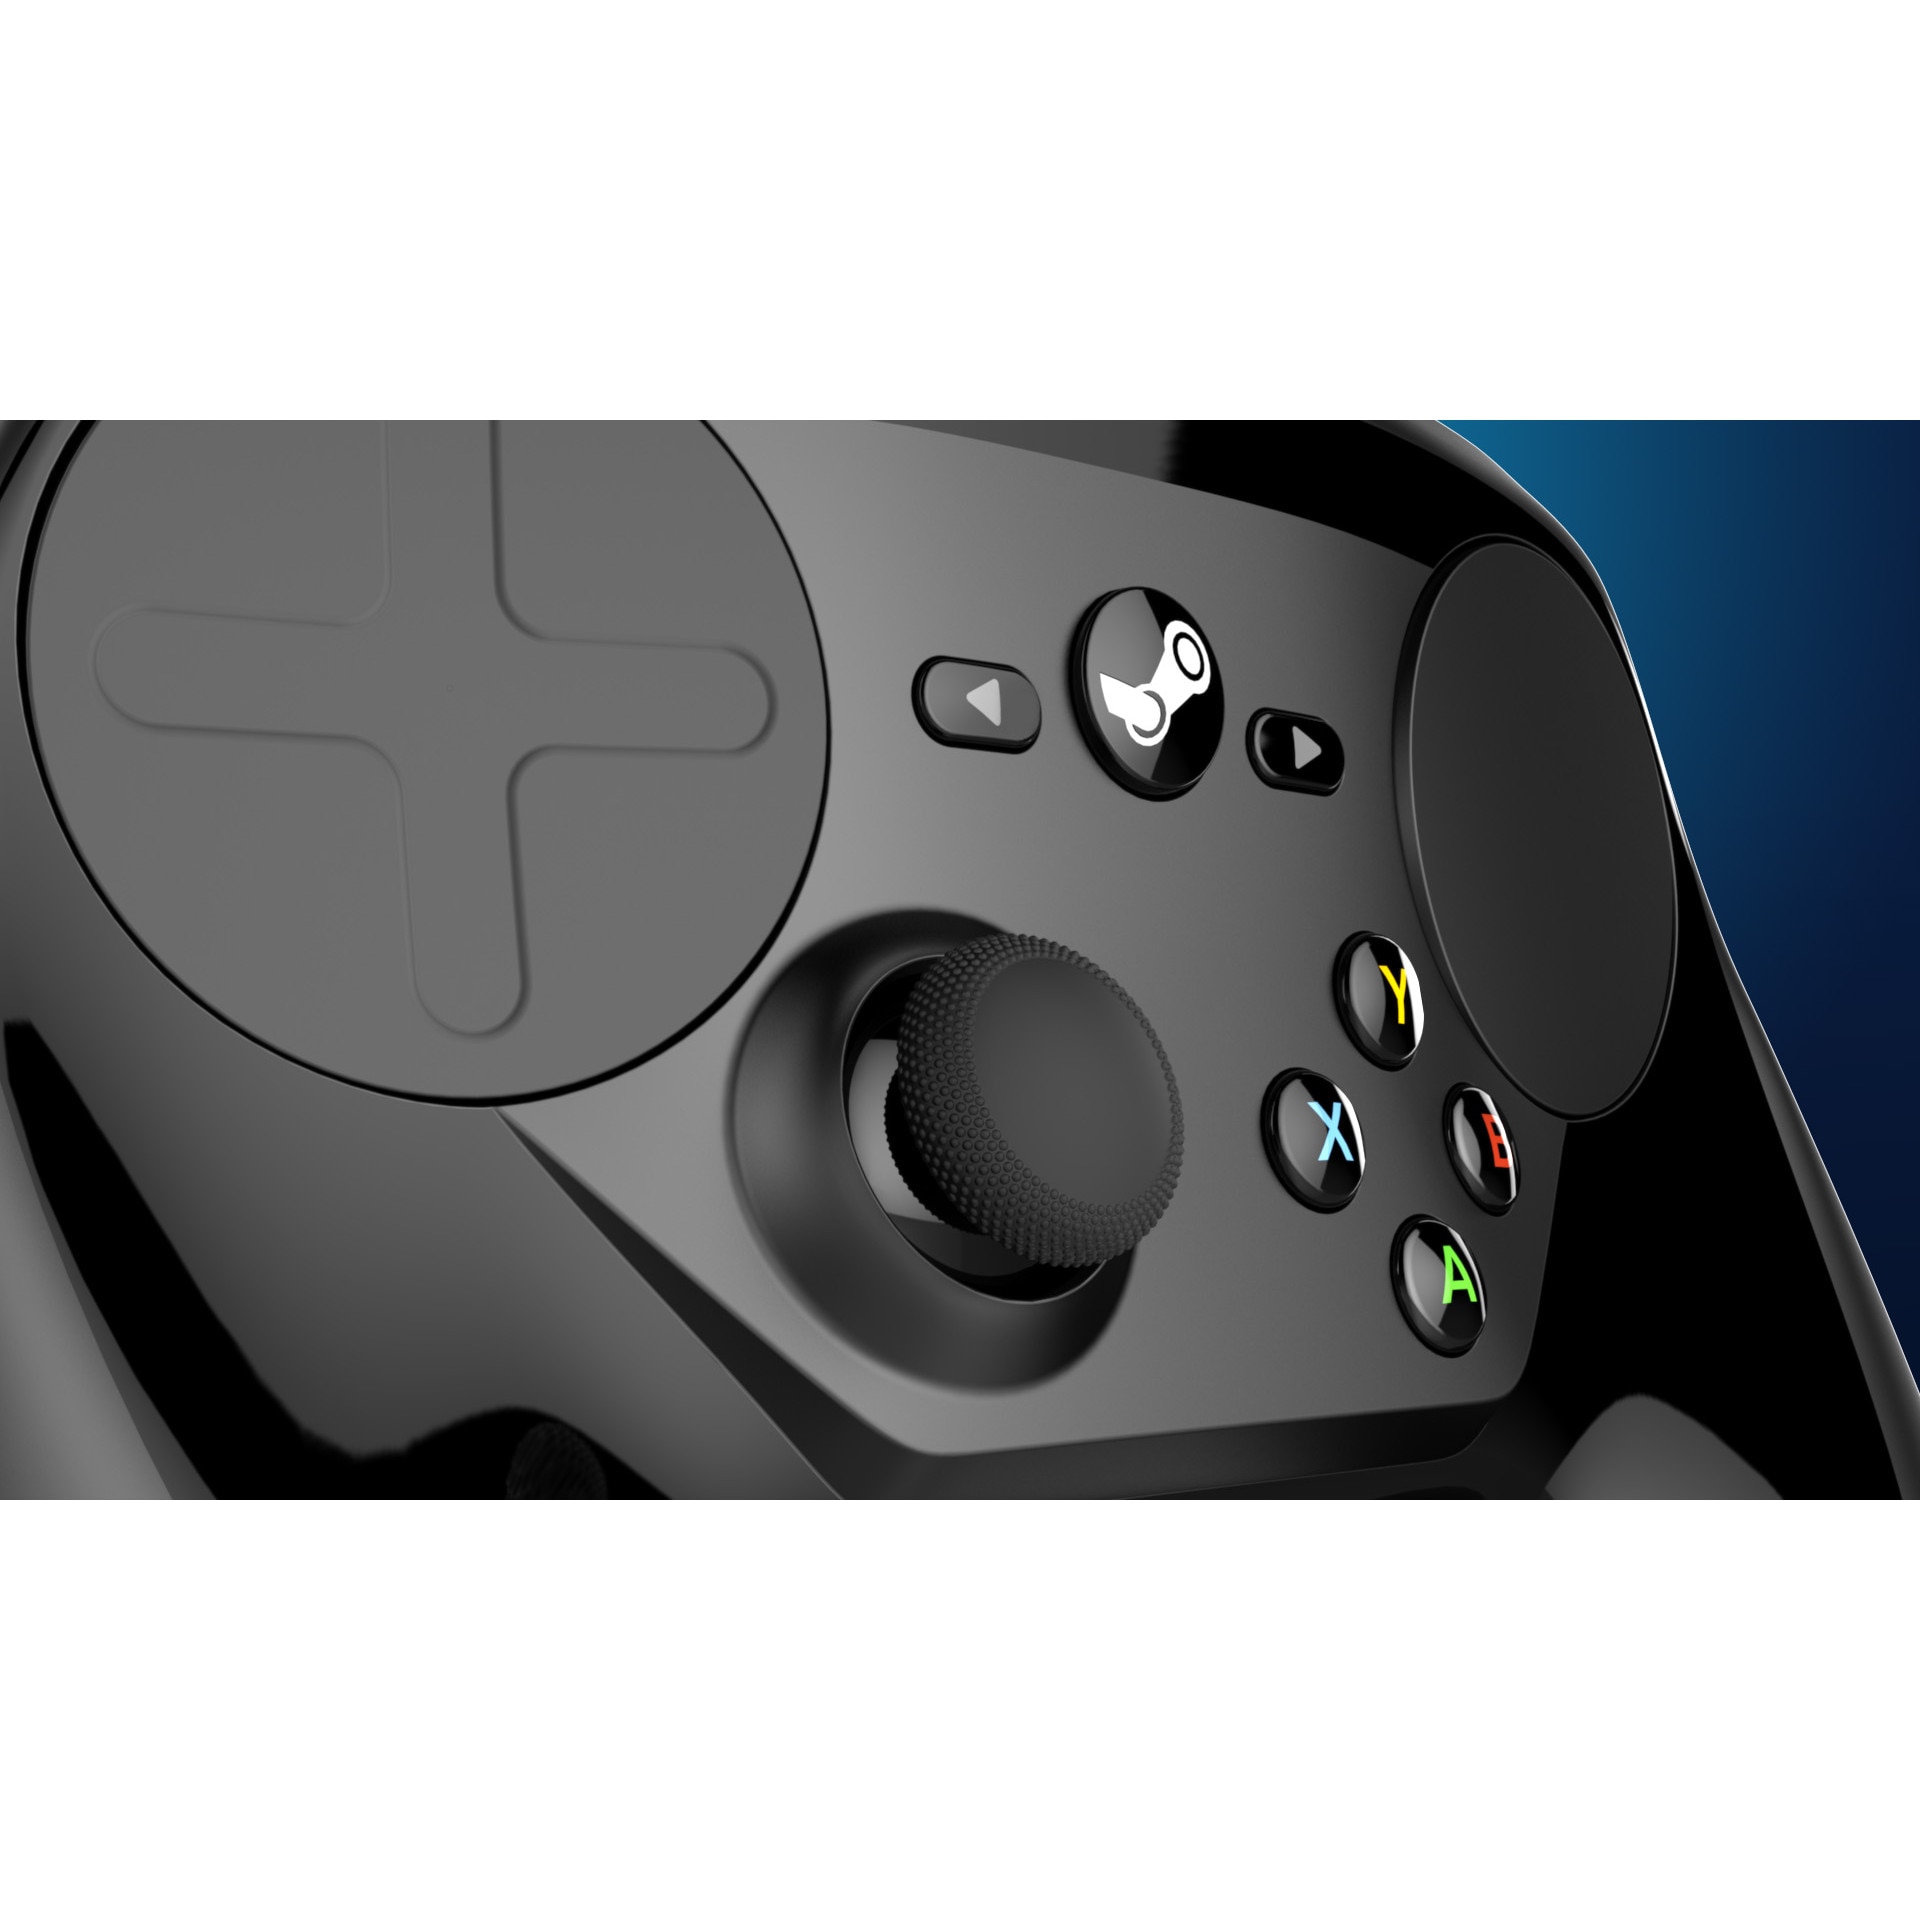 Using gamepad with steam фото 80